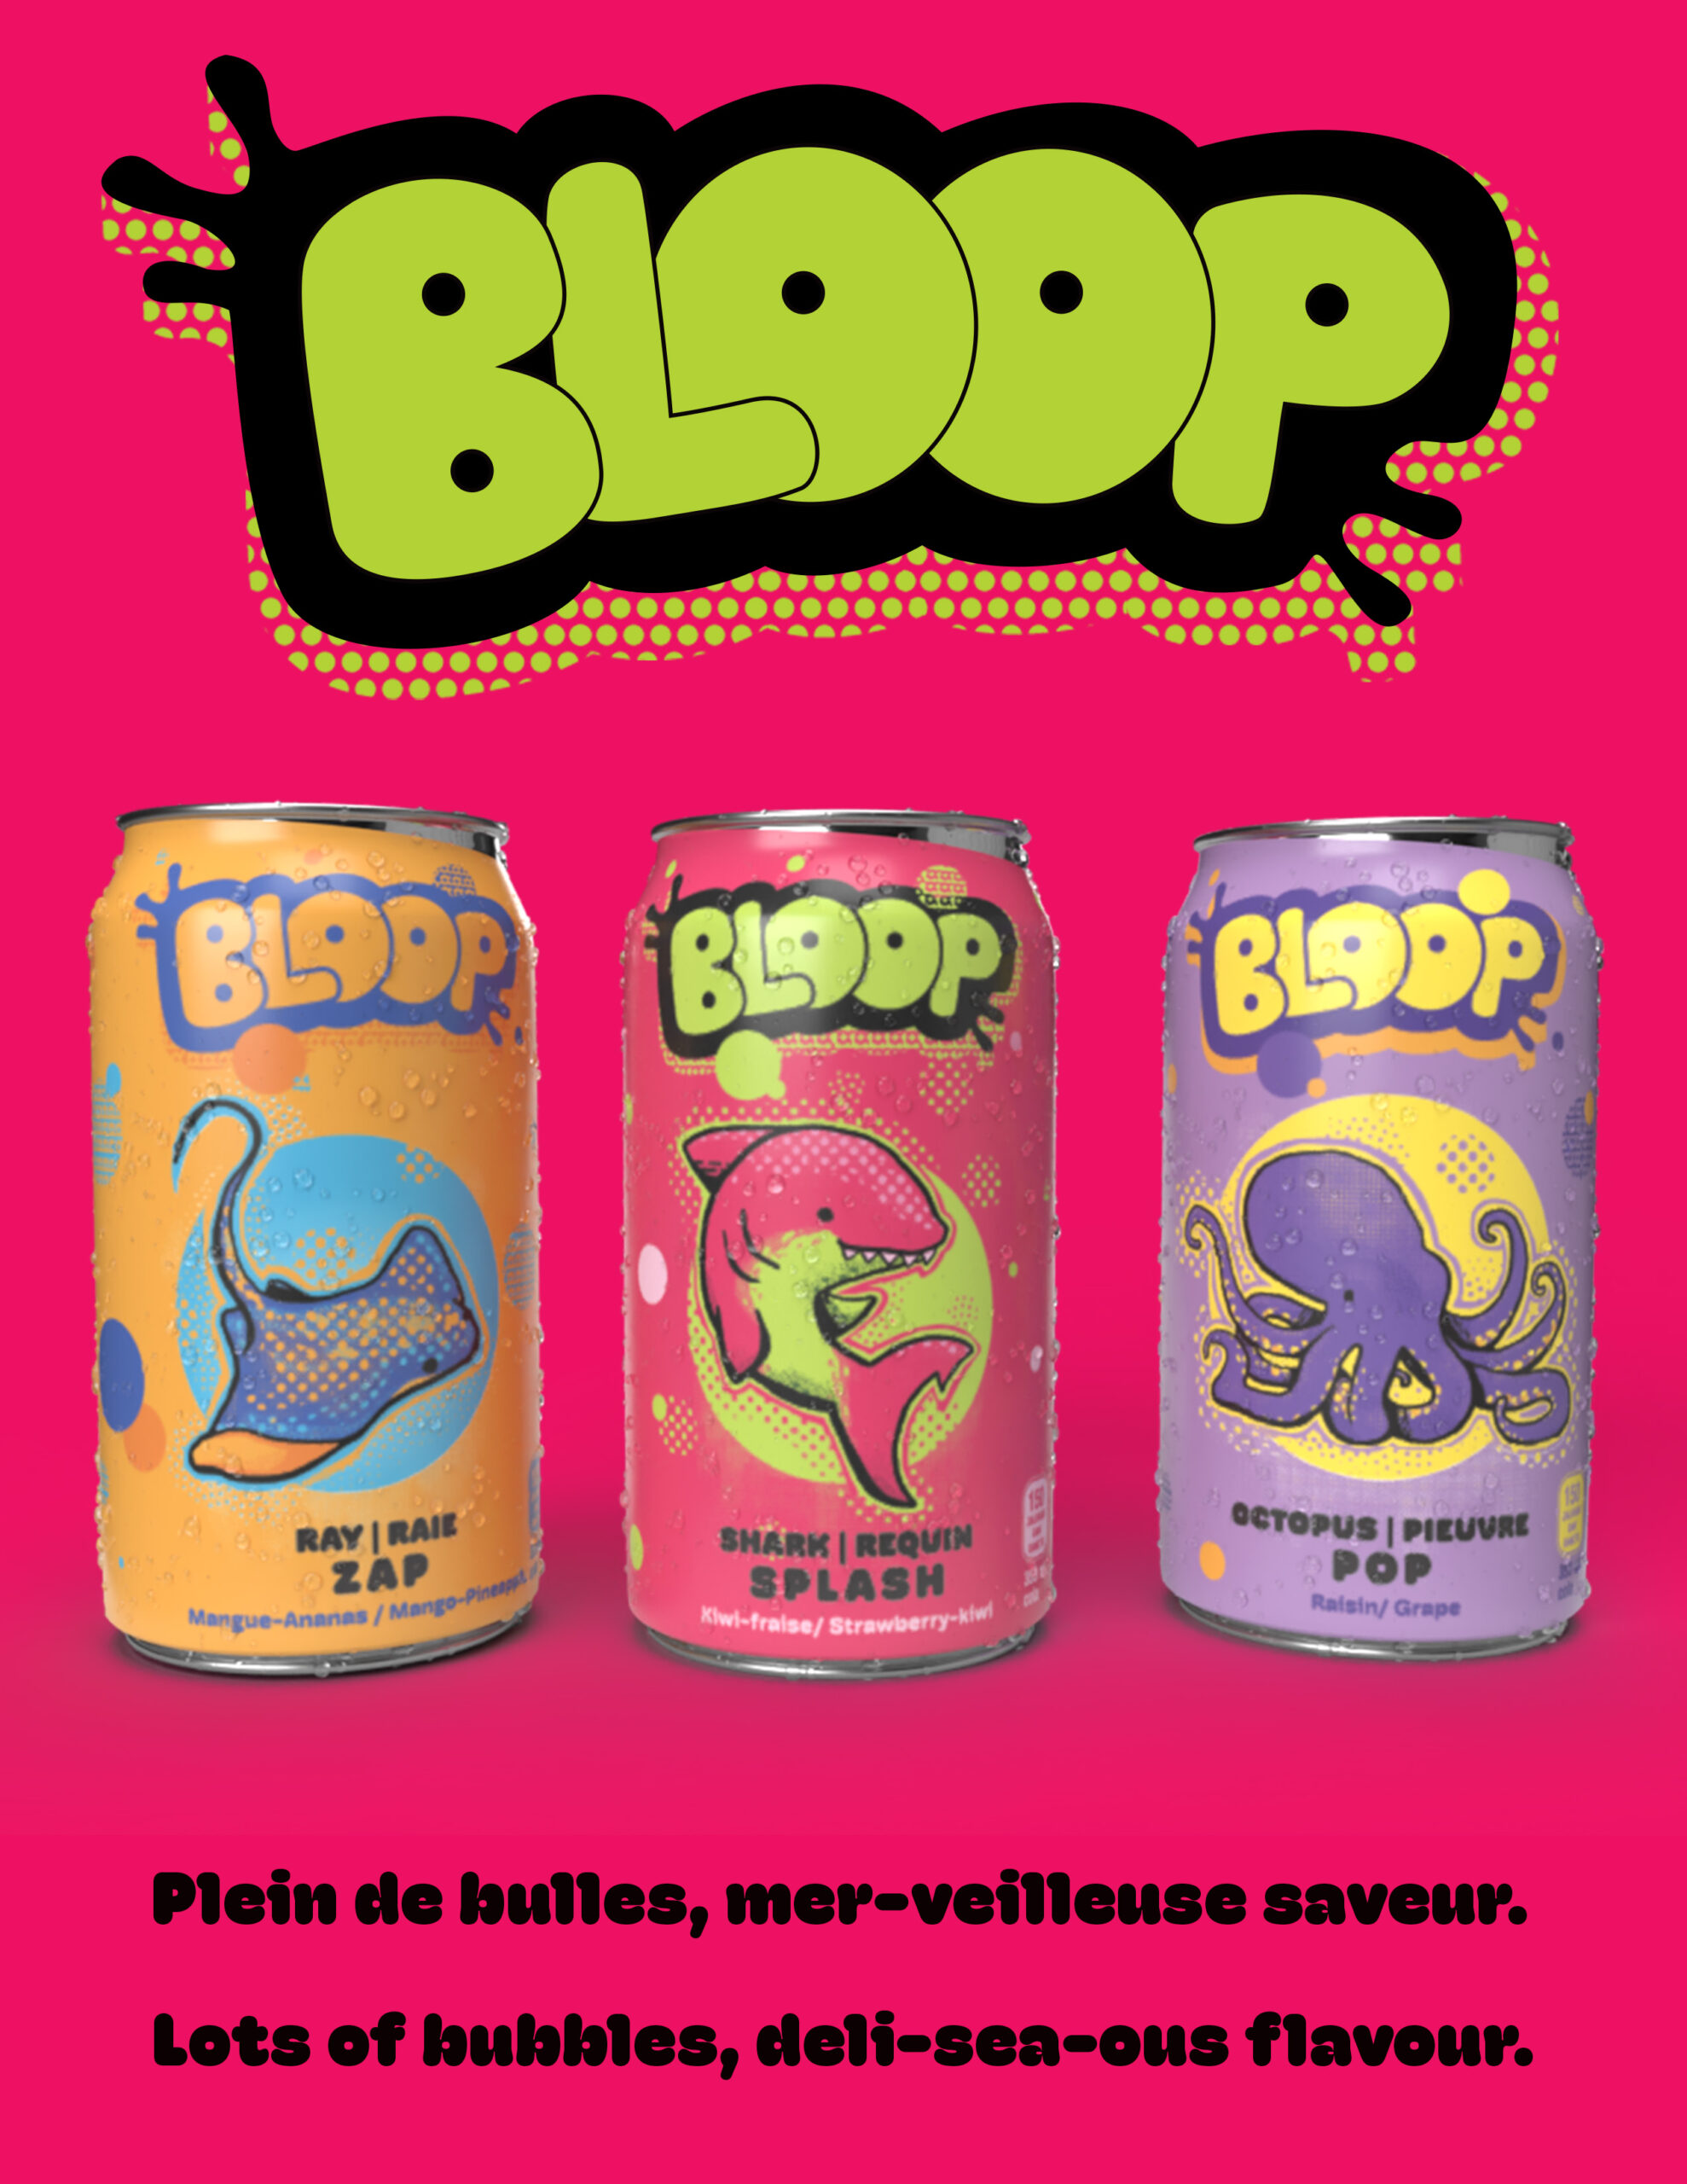 Bloop advertisement for the drink line